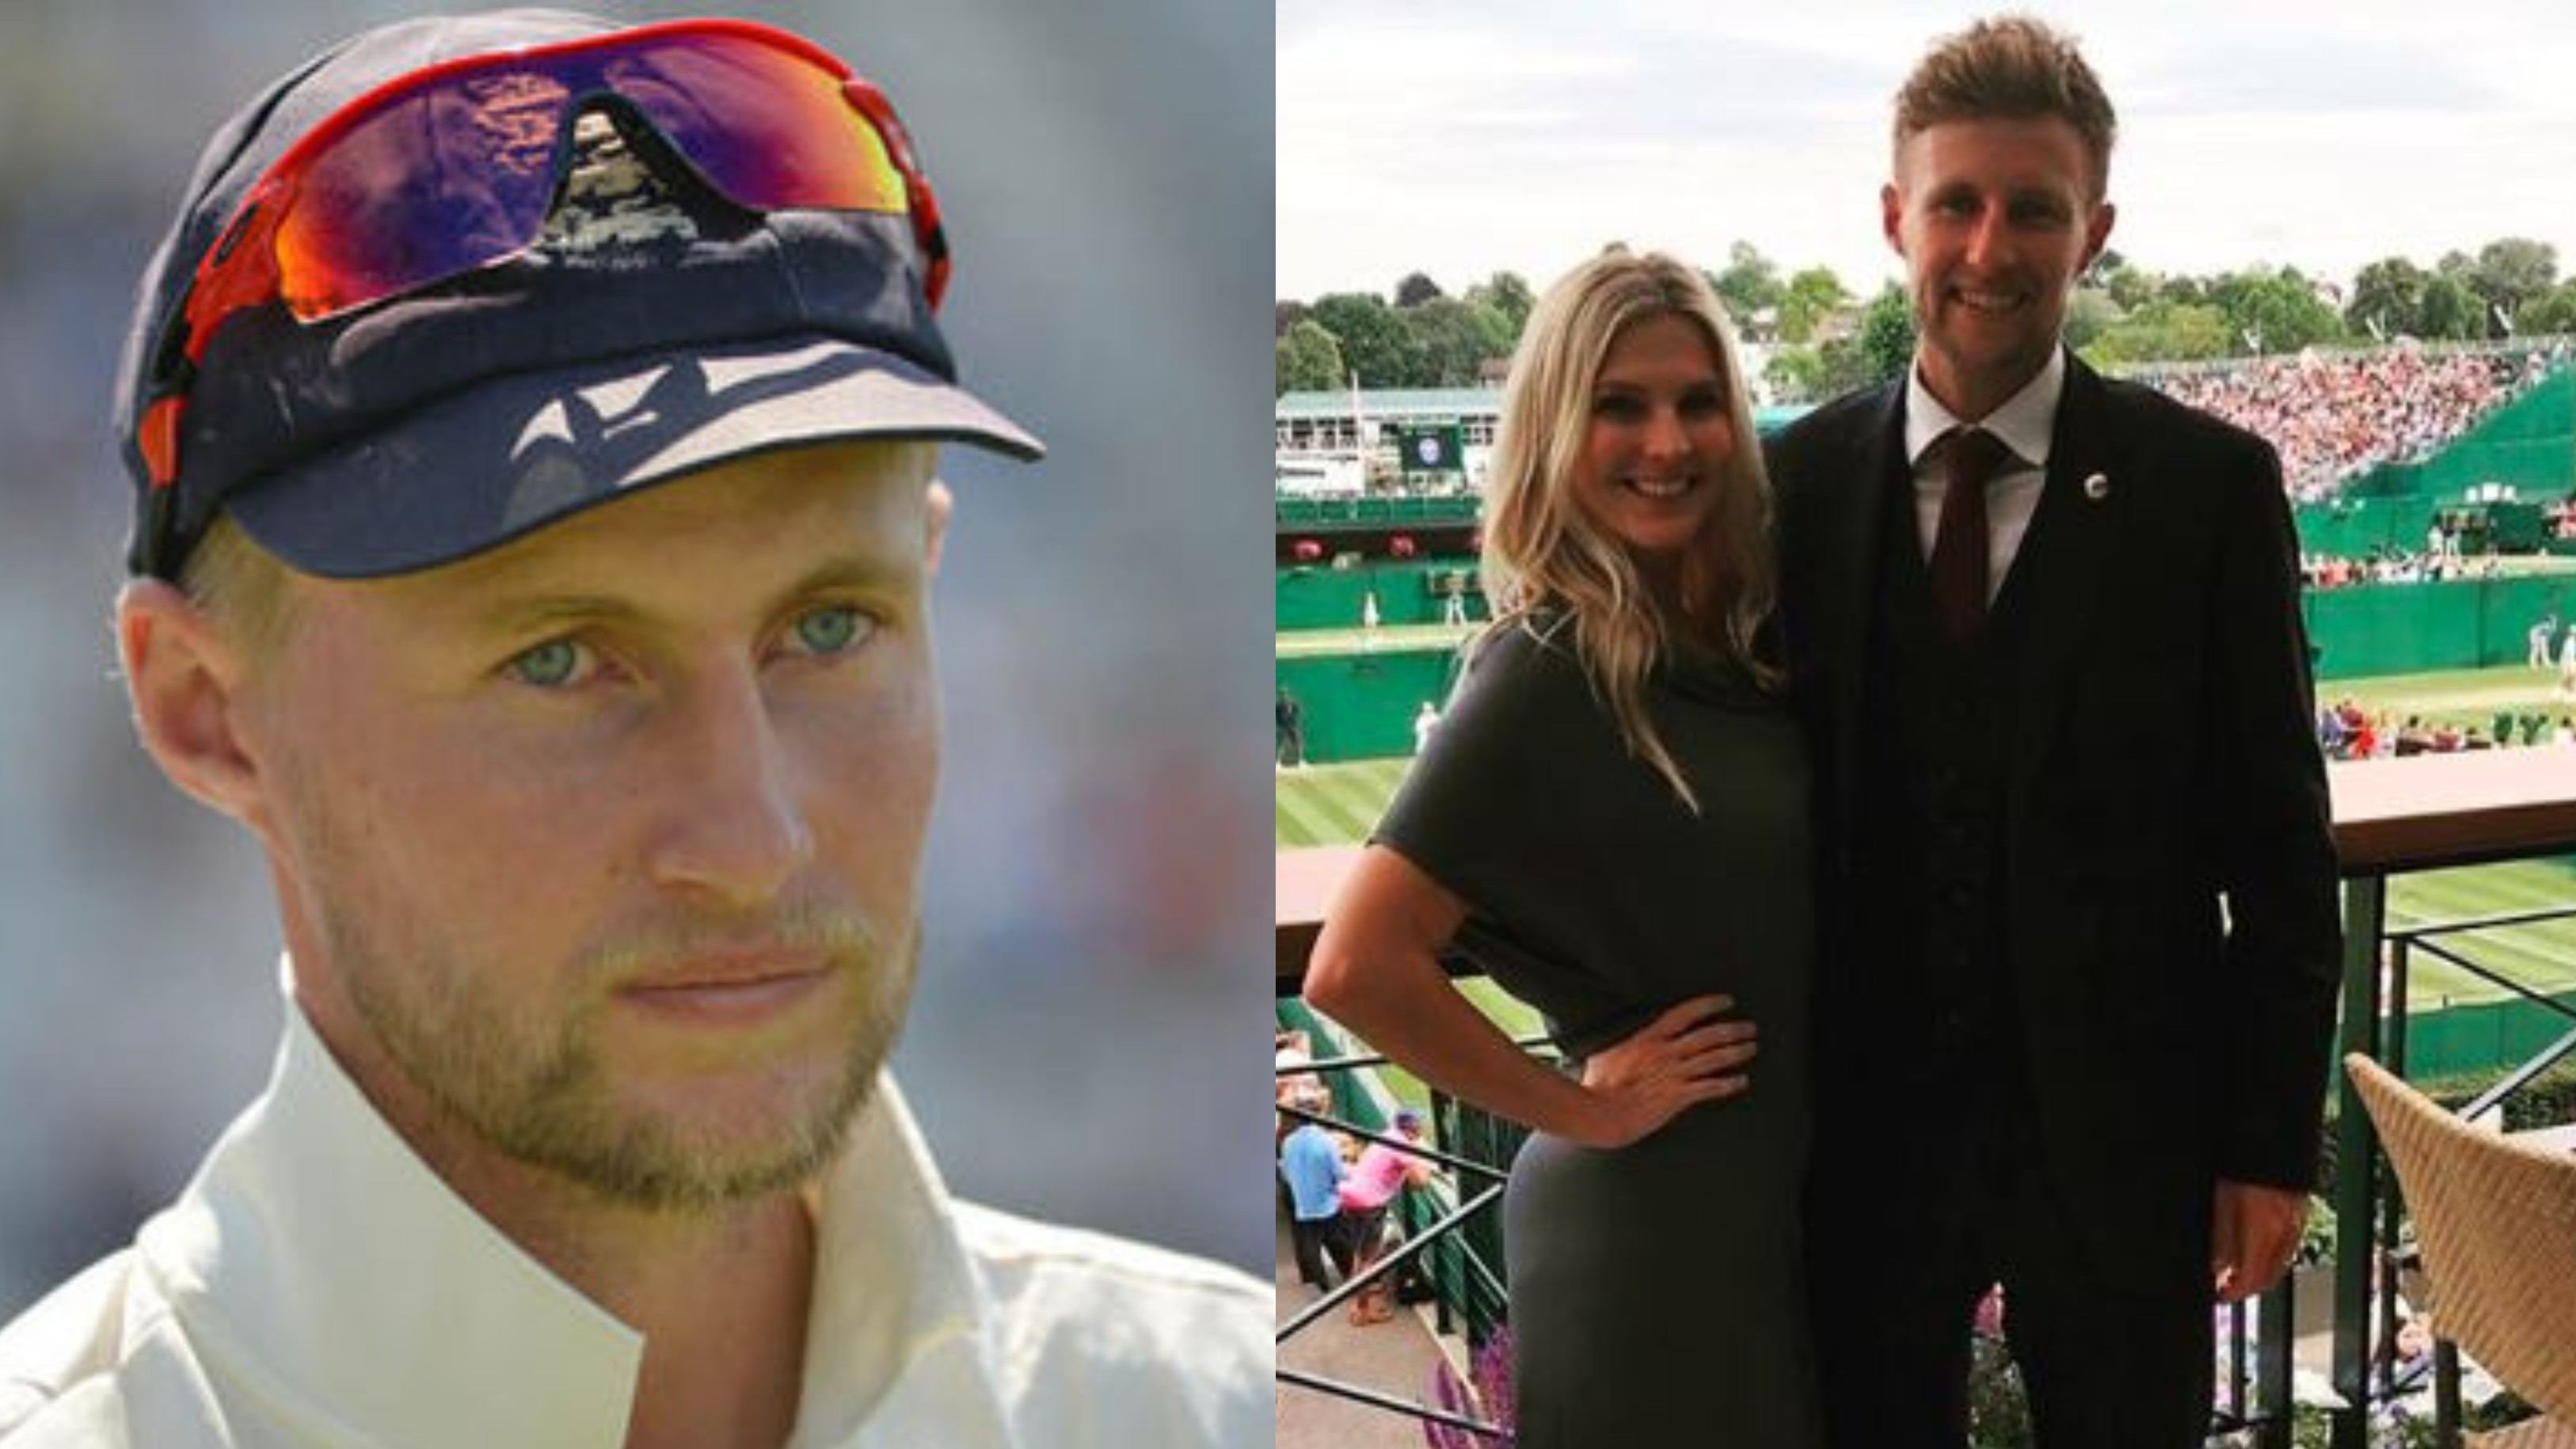 ENG v WI 2020: Joe Root likely to miss First Test due to COVID-19 isolation rule for attending his child's birth